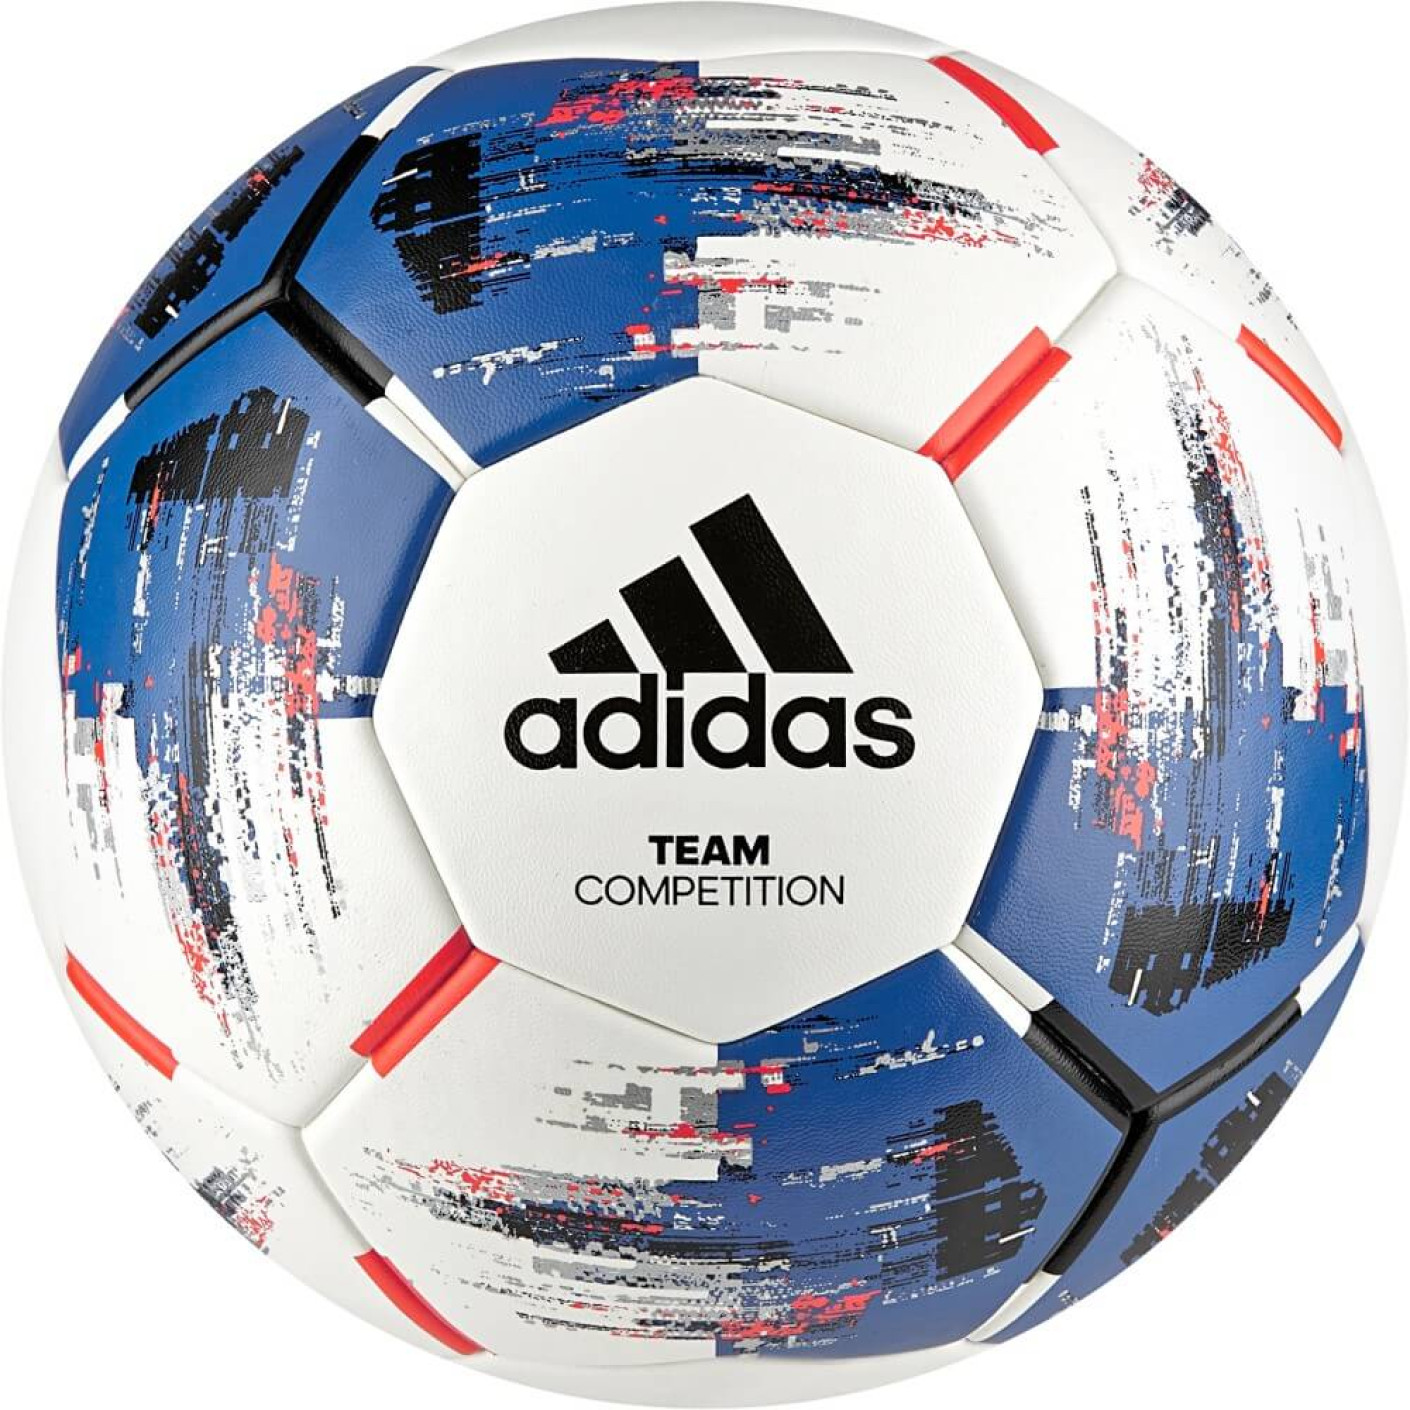 adidas Team Competition Voetbal 5 White Blue Black Solar